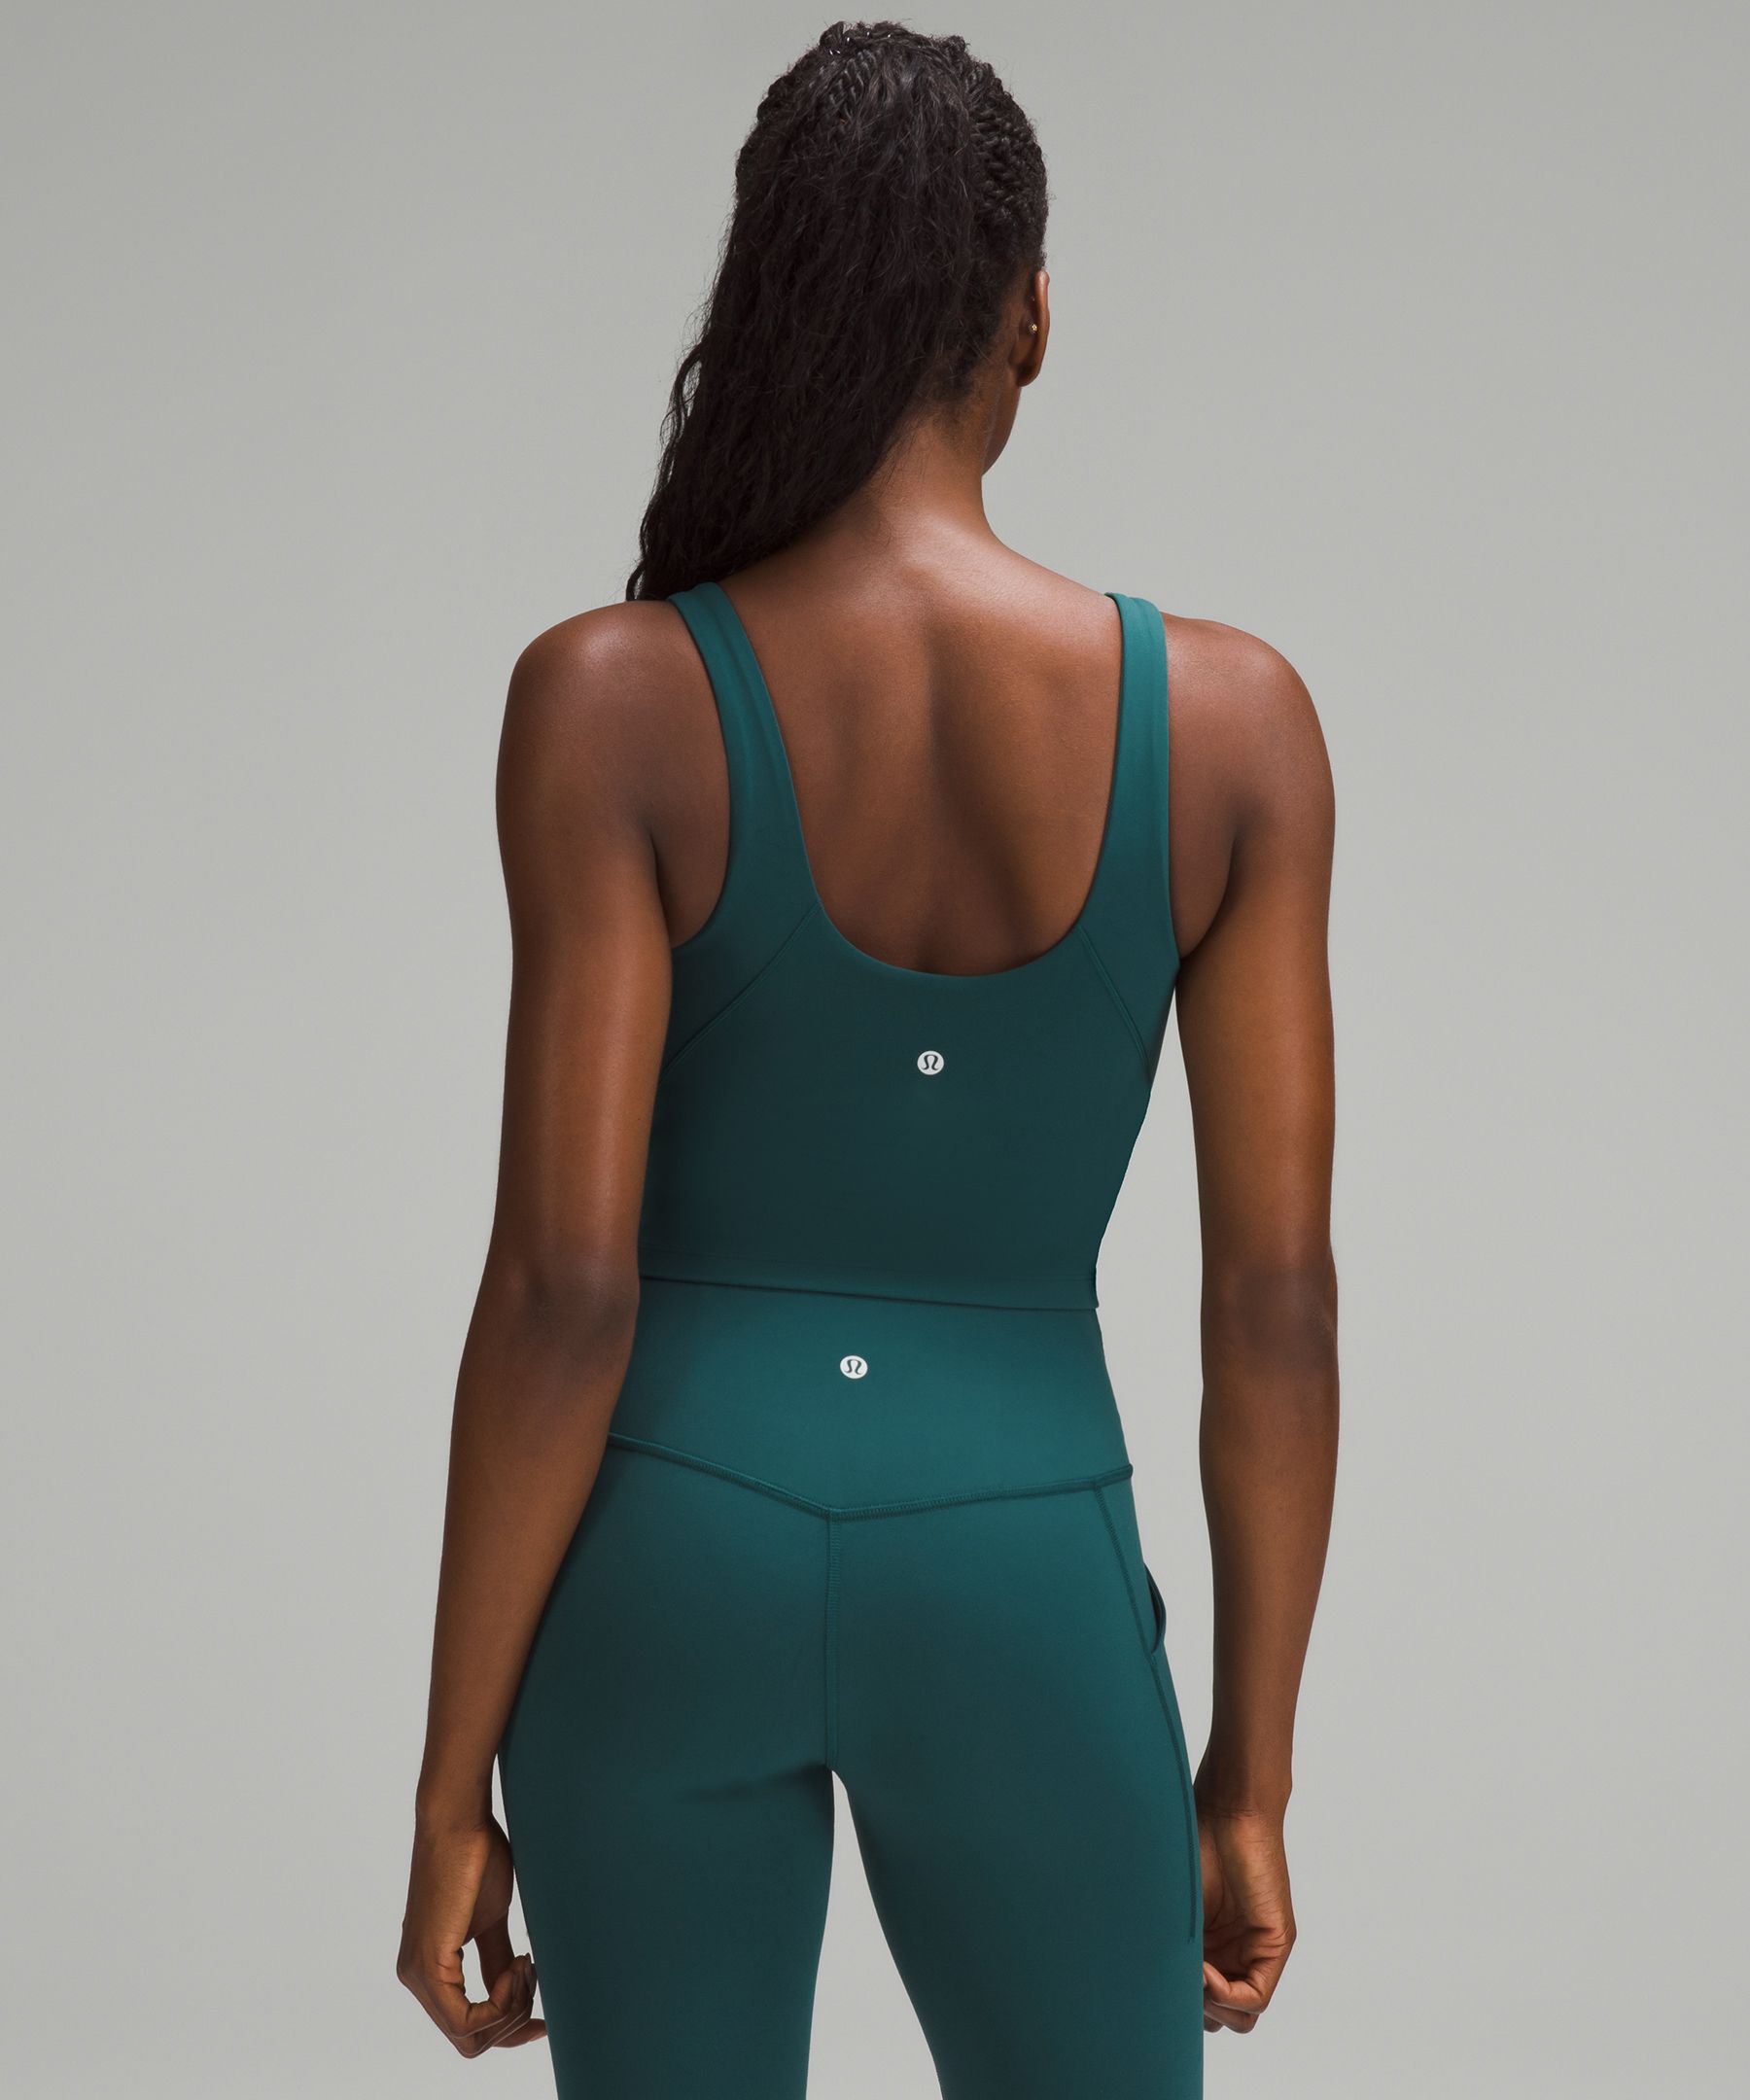 Lululemon Elixir Align Tank Waist Length Green Size 6 - $51 (27% Off  Retail) New With Tags - From Corinne